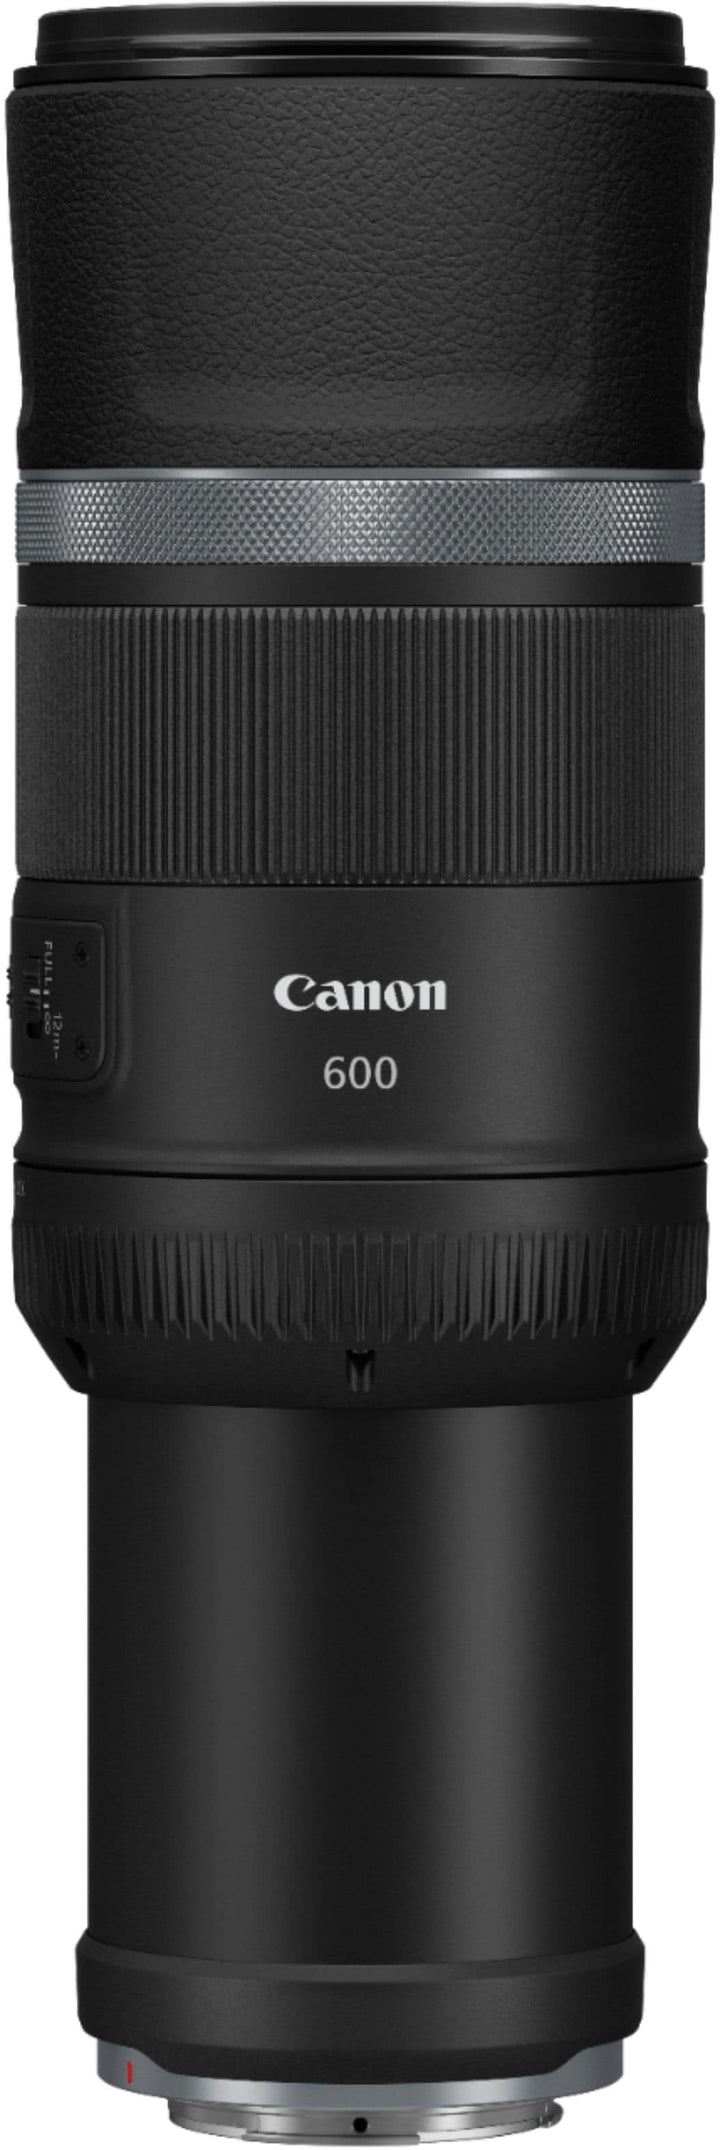 Canon - RF 600mm f/11 IS STM Telephoto Lens for EOS R Cameras - Black_6